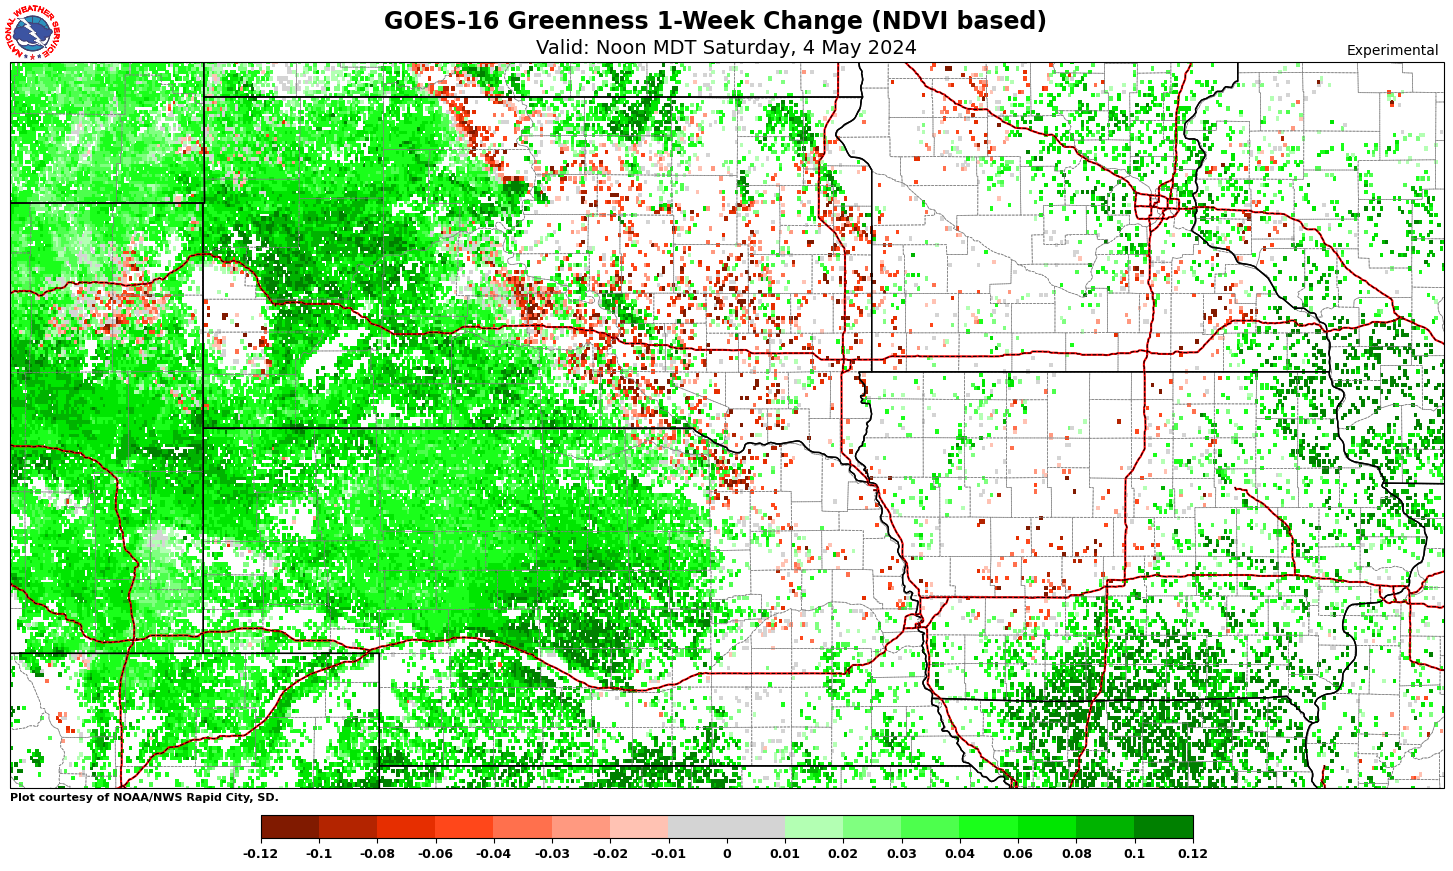 GOES-16 Greenness 5-Day Change (NDVI based)